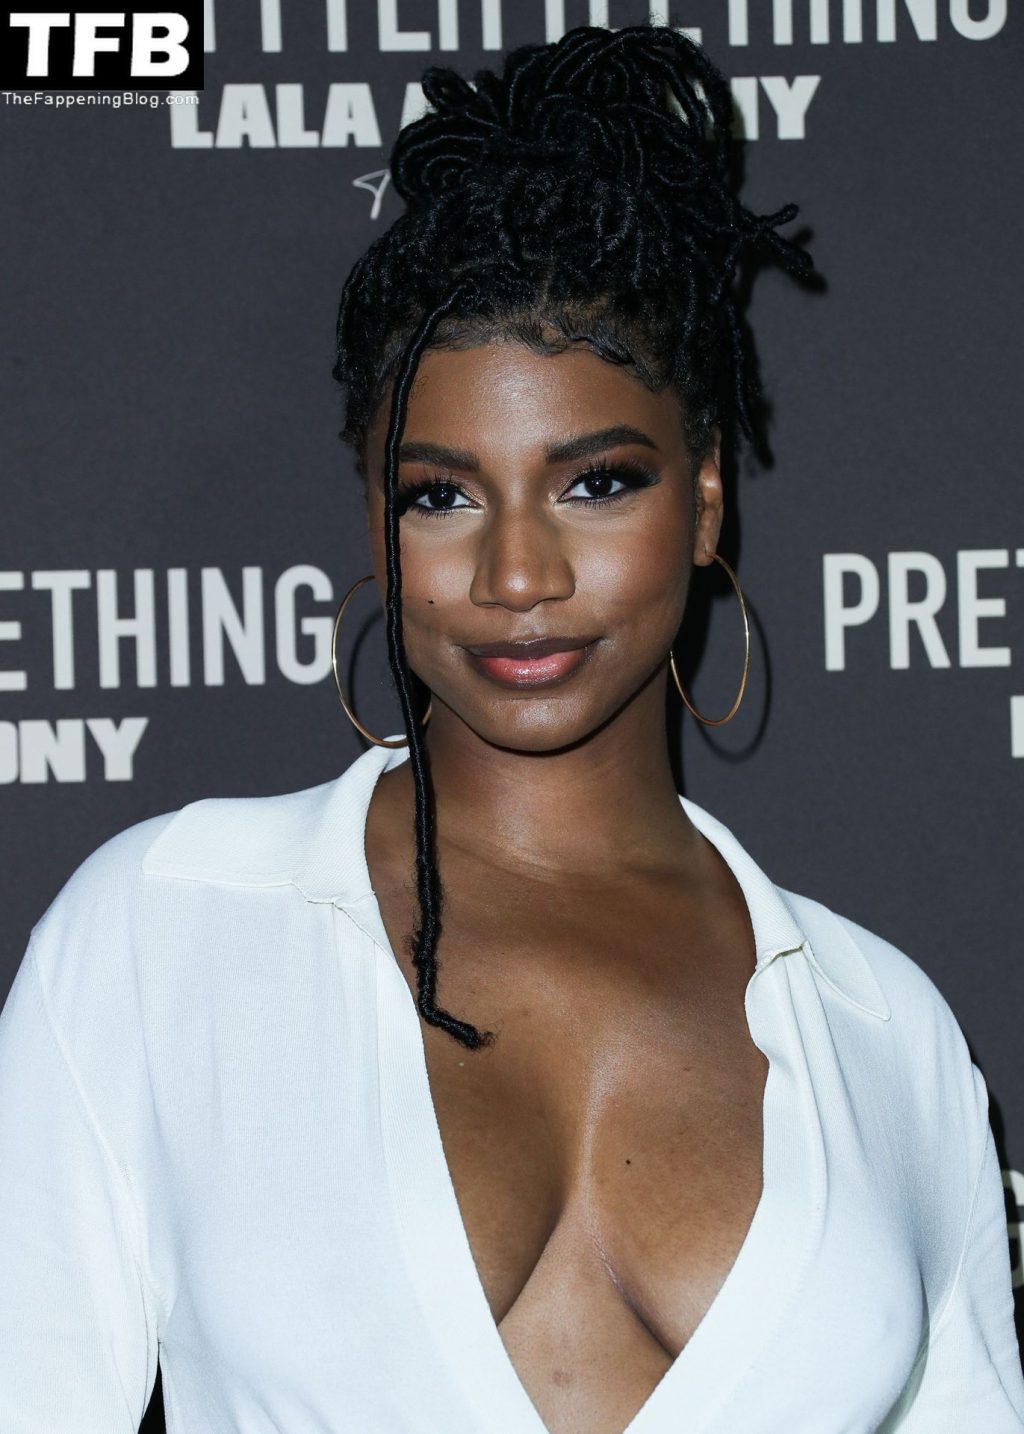 Taylor Rooks Shows Off Her Sexy Tits at the PrettyLittleThing La La Anthony EDIT Launch Party (11 Photos)